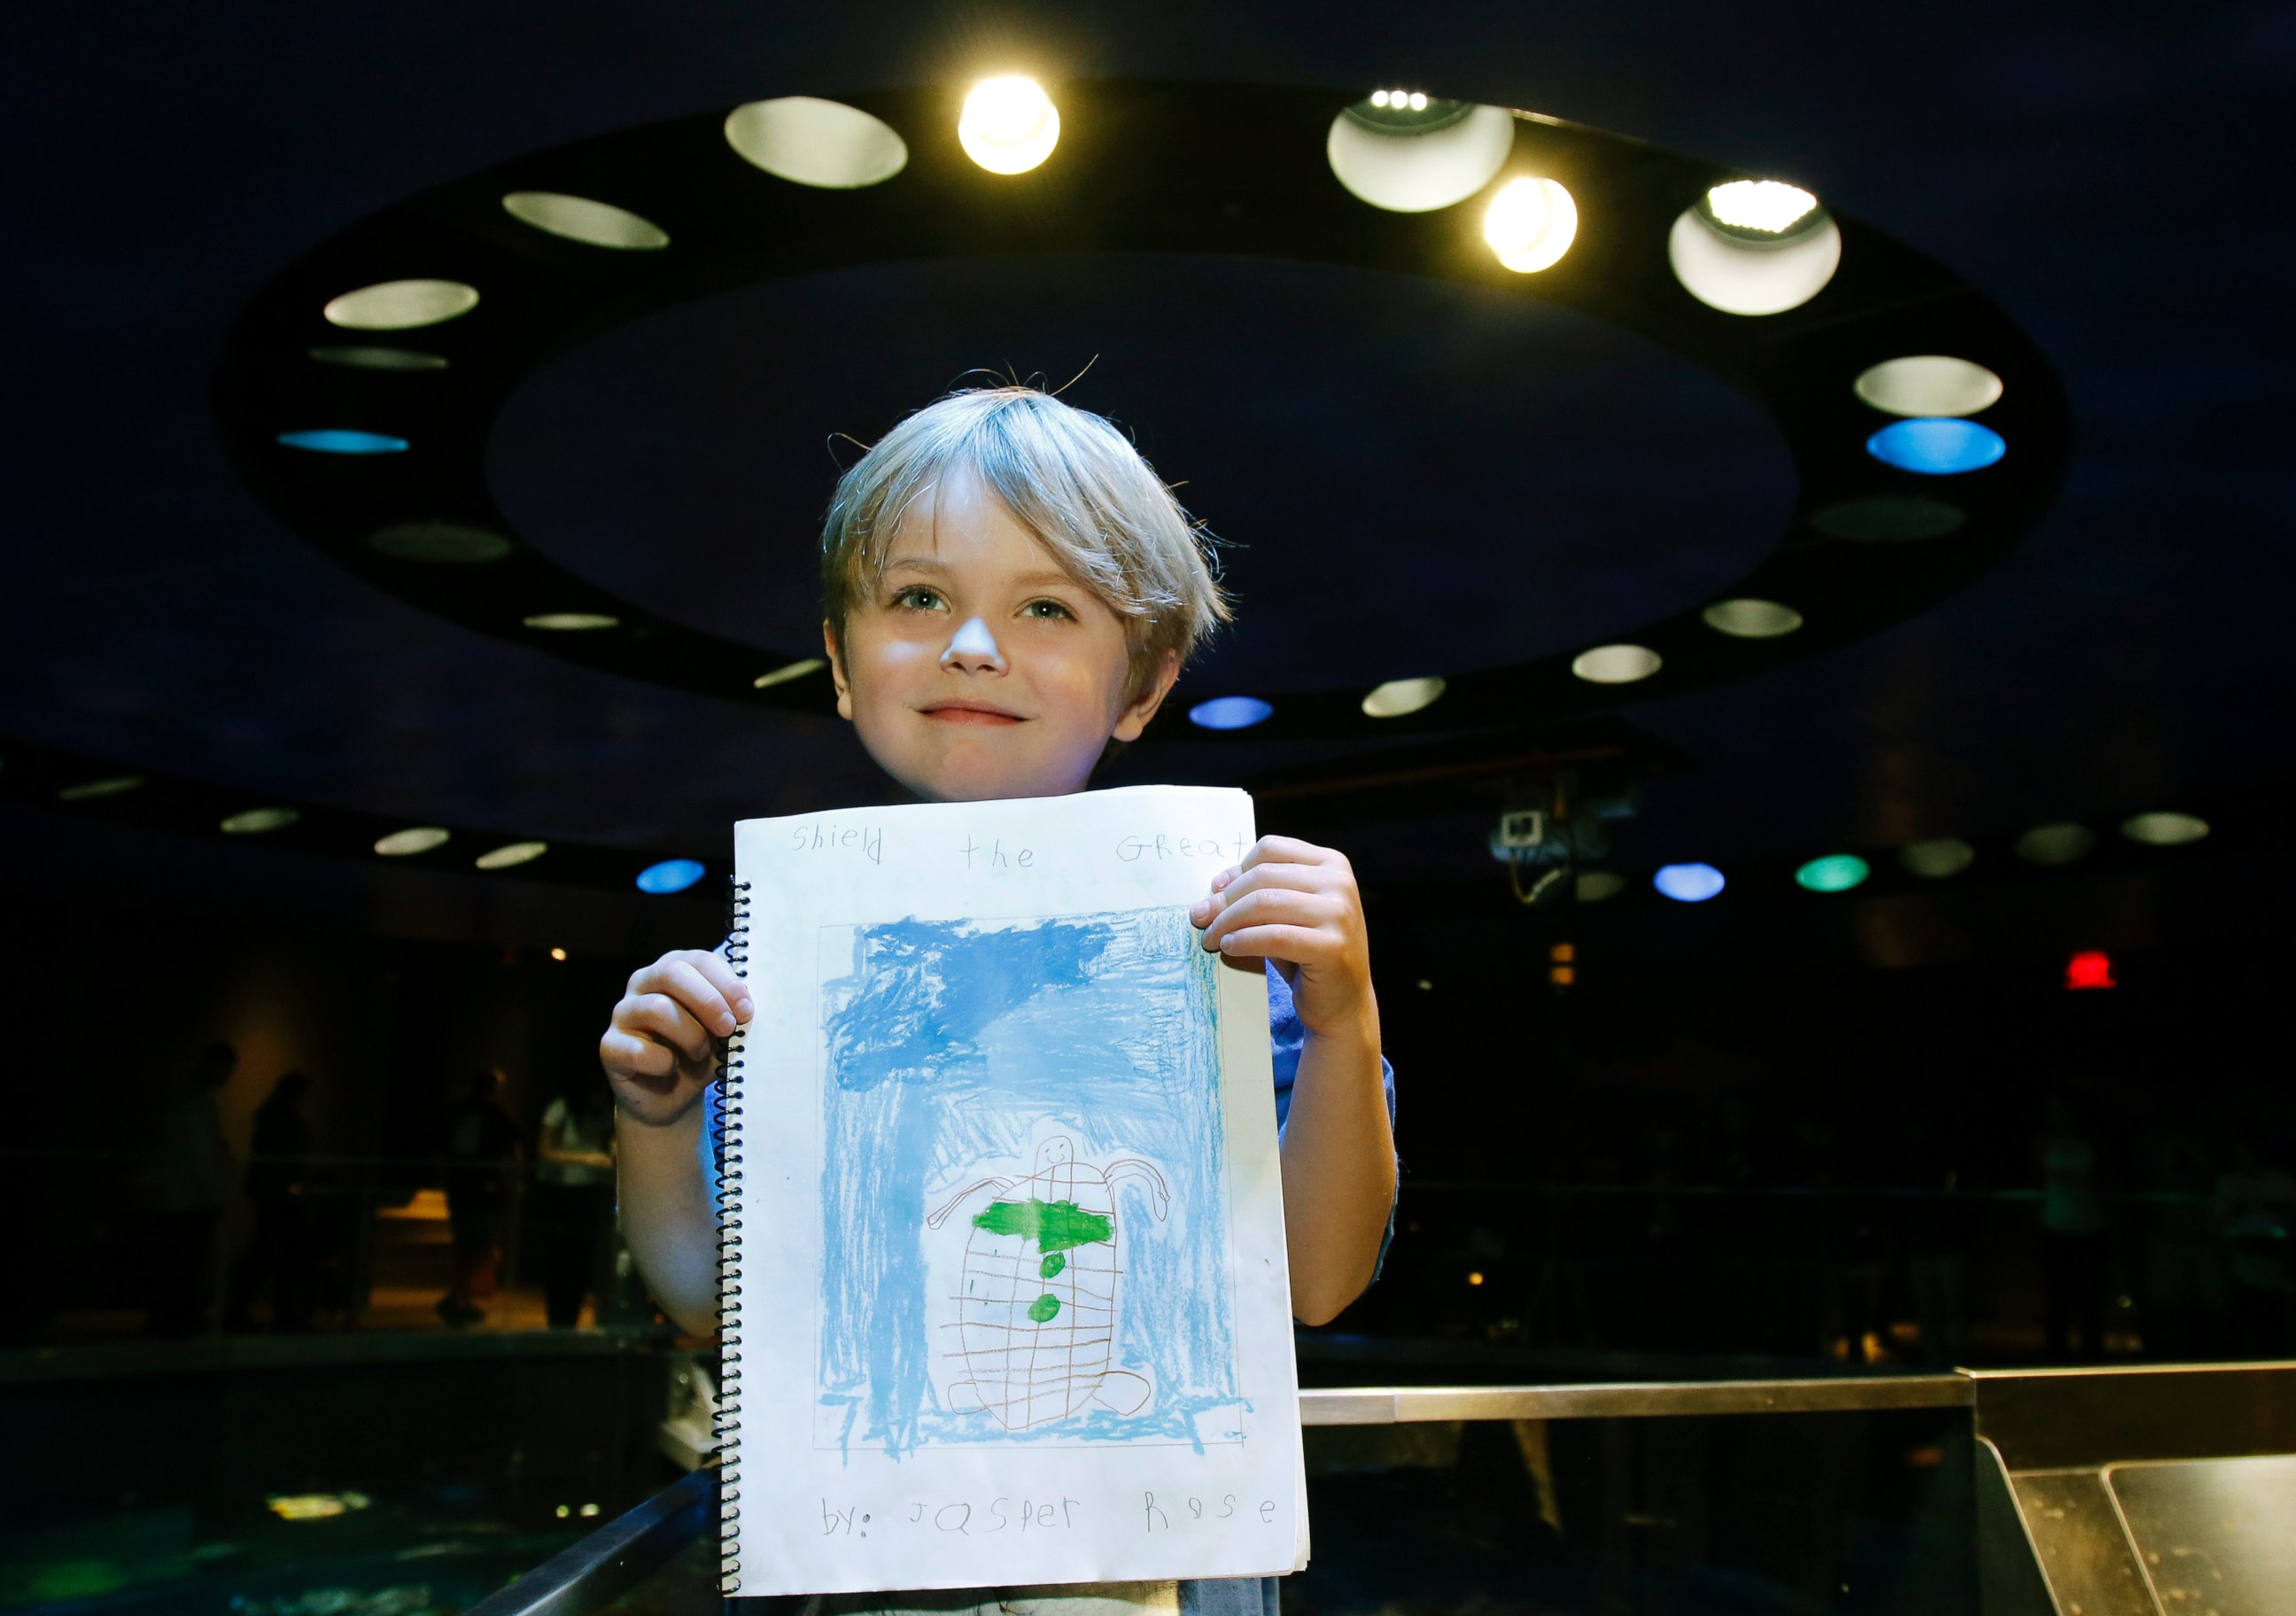 PHOTO: Jasper Rose, of Watertown, Mass., holds a booklet he created about turtles as he stands by the main tank at the New England Aquarium, April 22, 2016, in Boston.